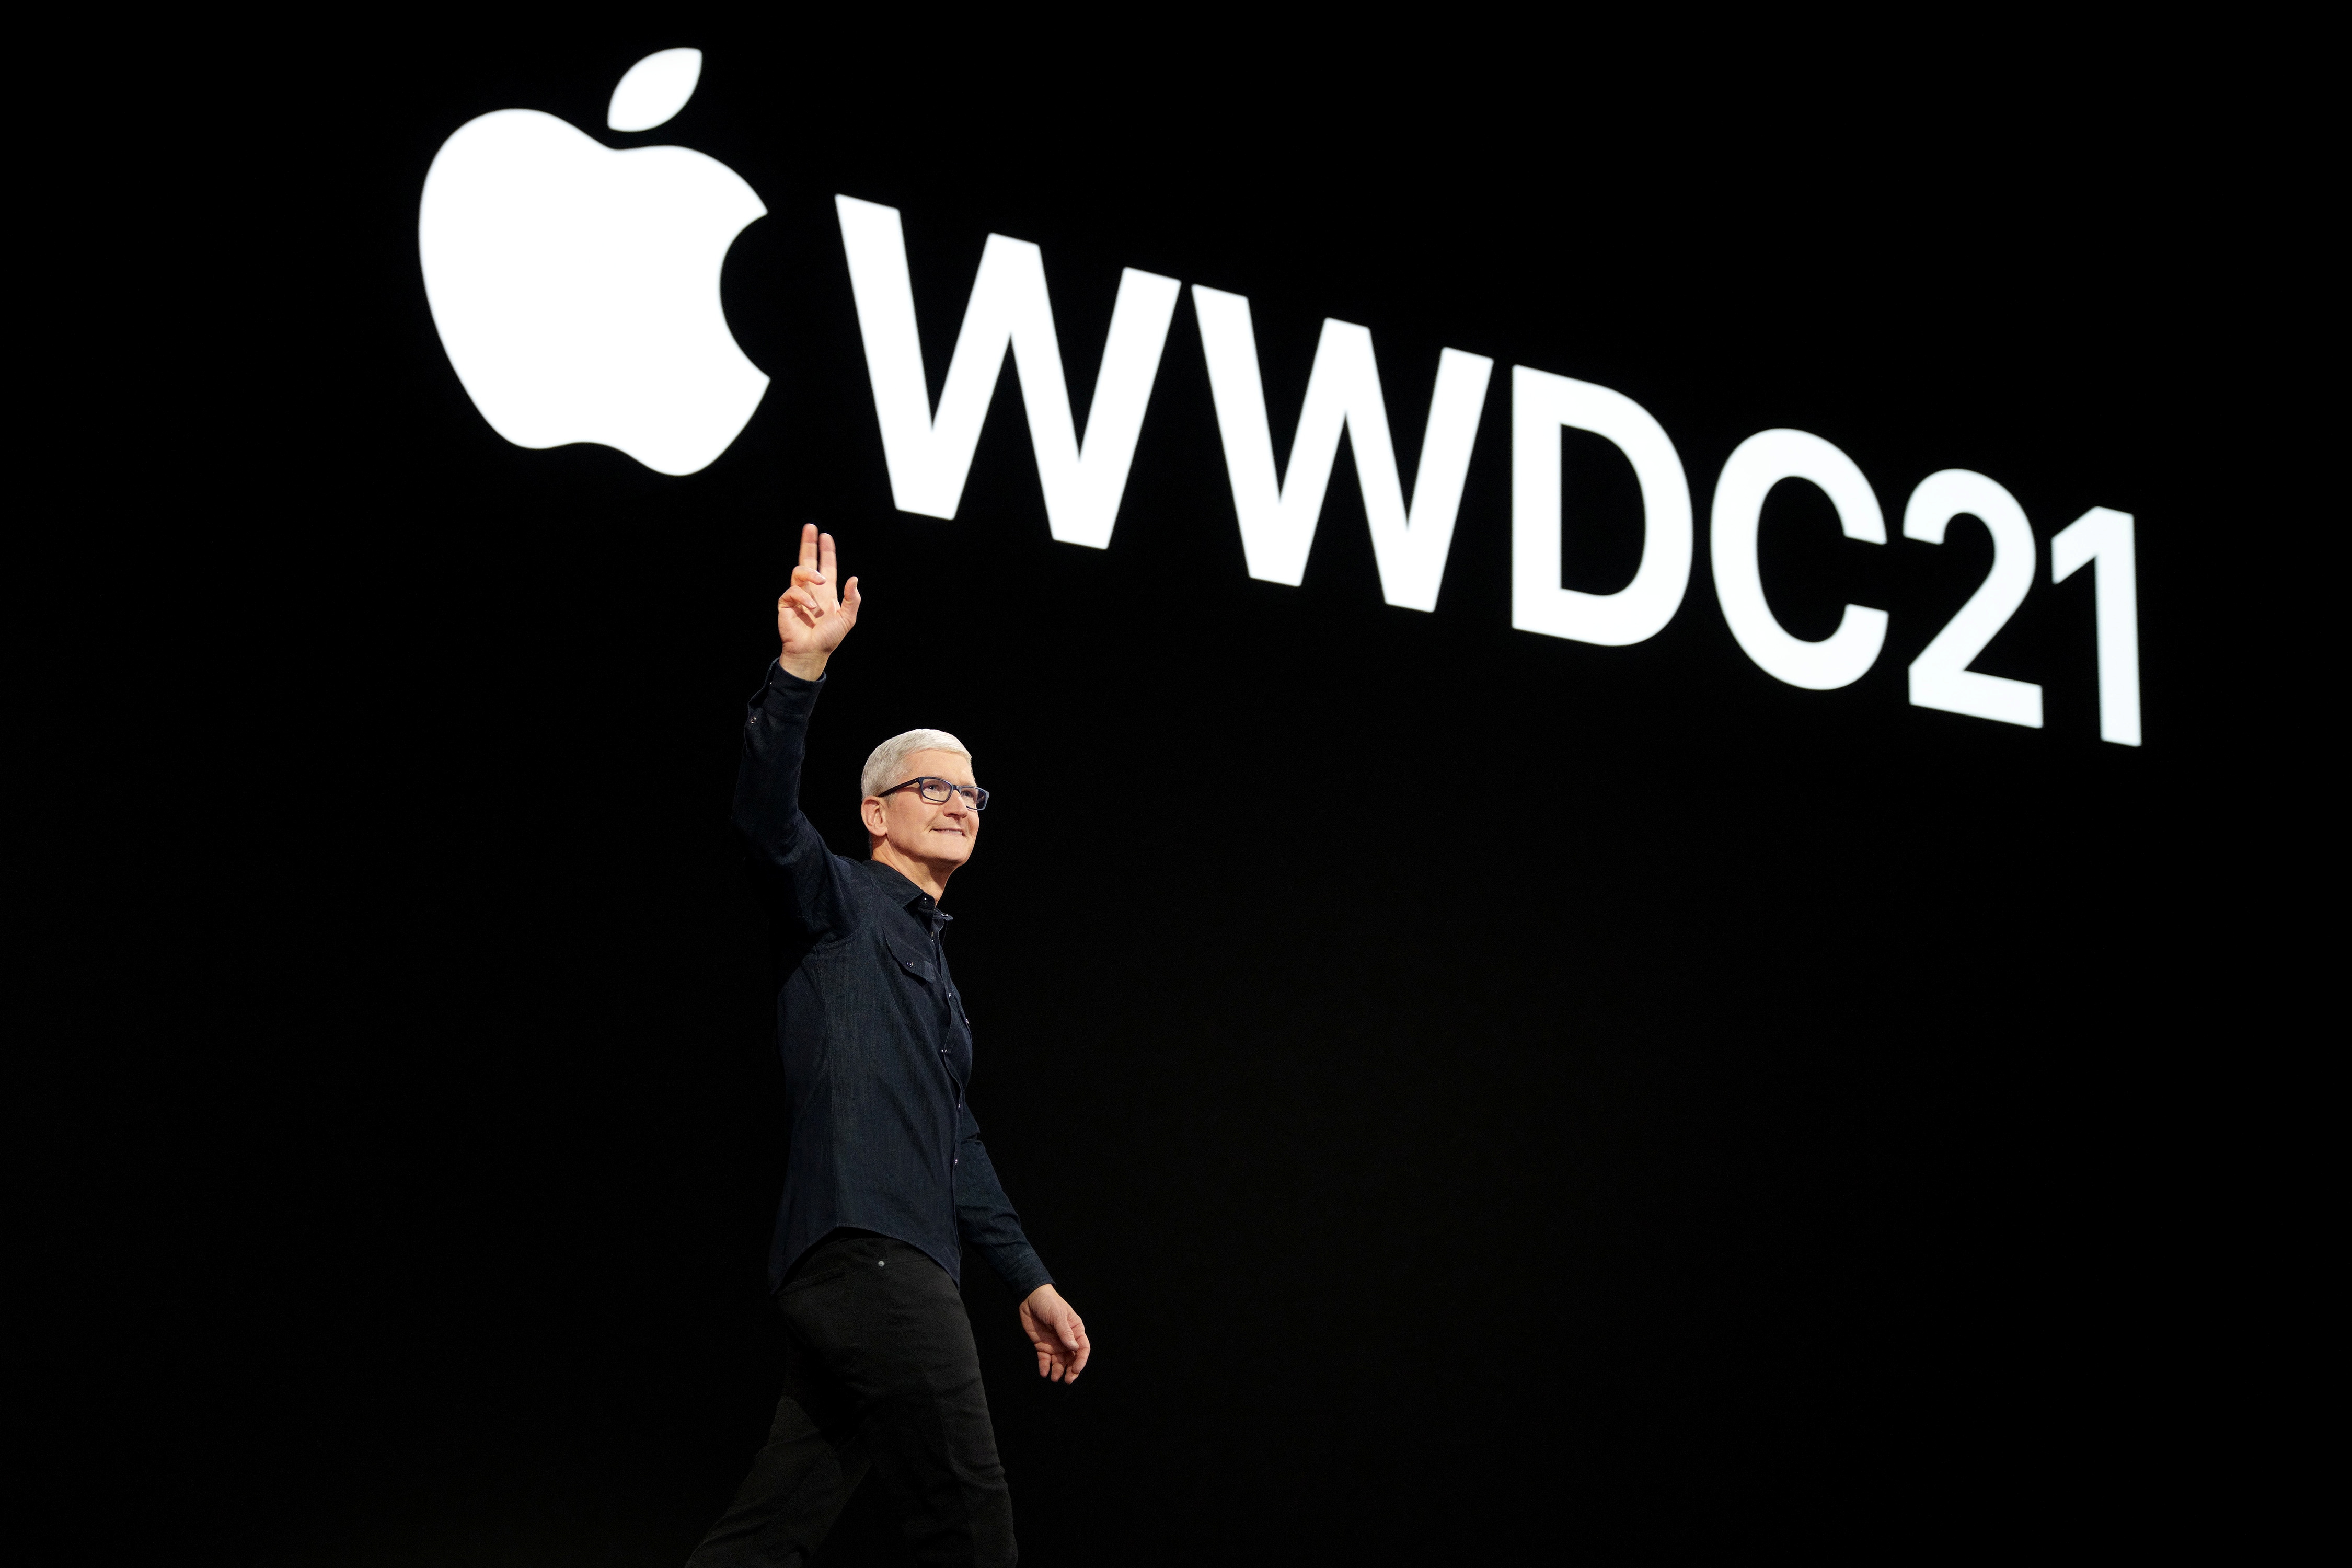 Apple CEO Tim Cook greets developers during Apple’s Worldwide Developers Conference